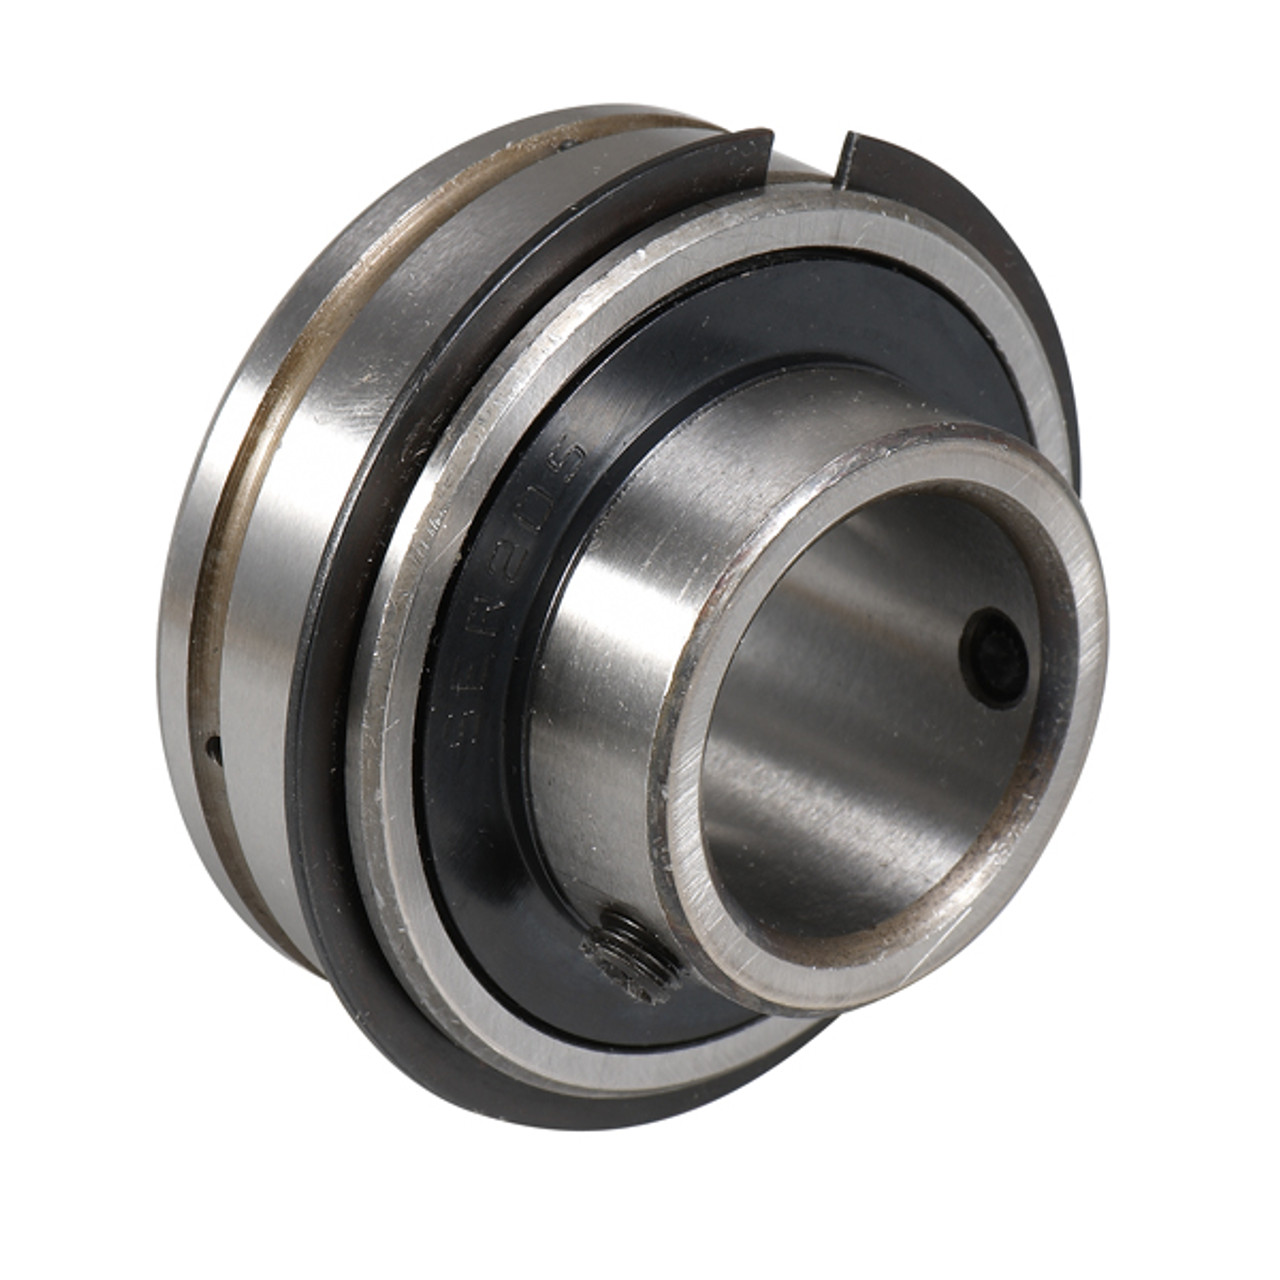 SER211-32 GENERIC 50.8mm Normal duty bearing insert with a parallel outer race and grubscrew locking - Imperial Thumbnail